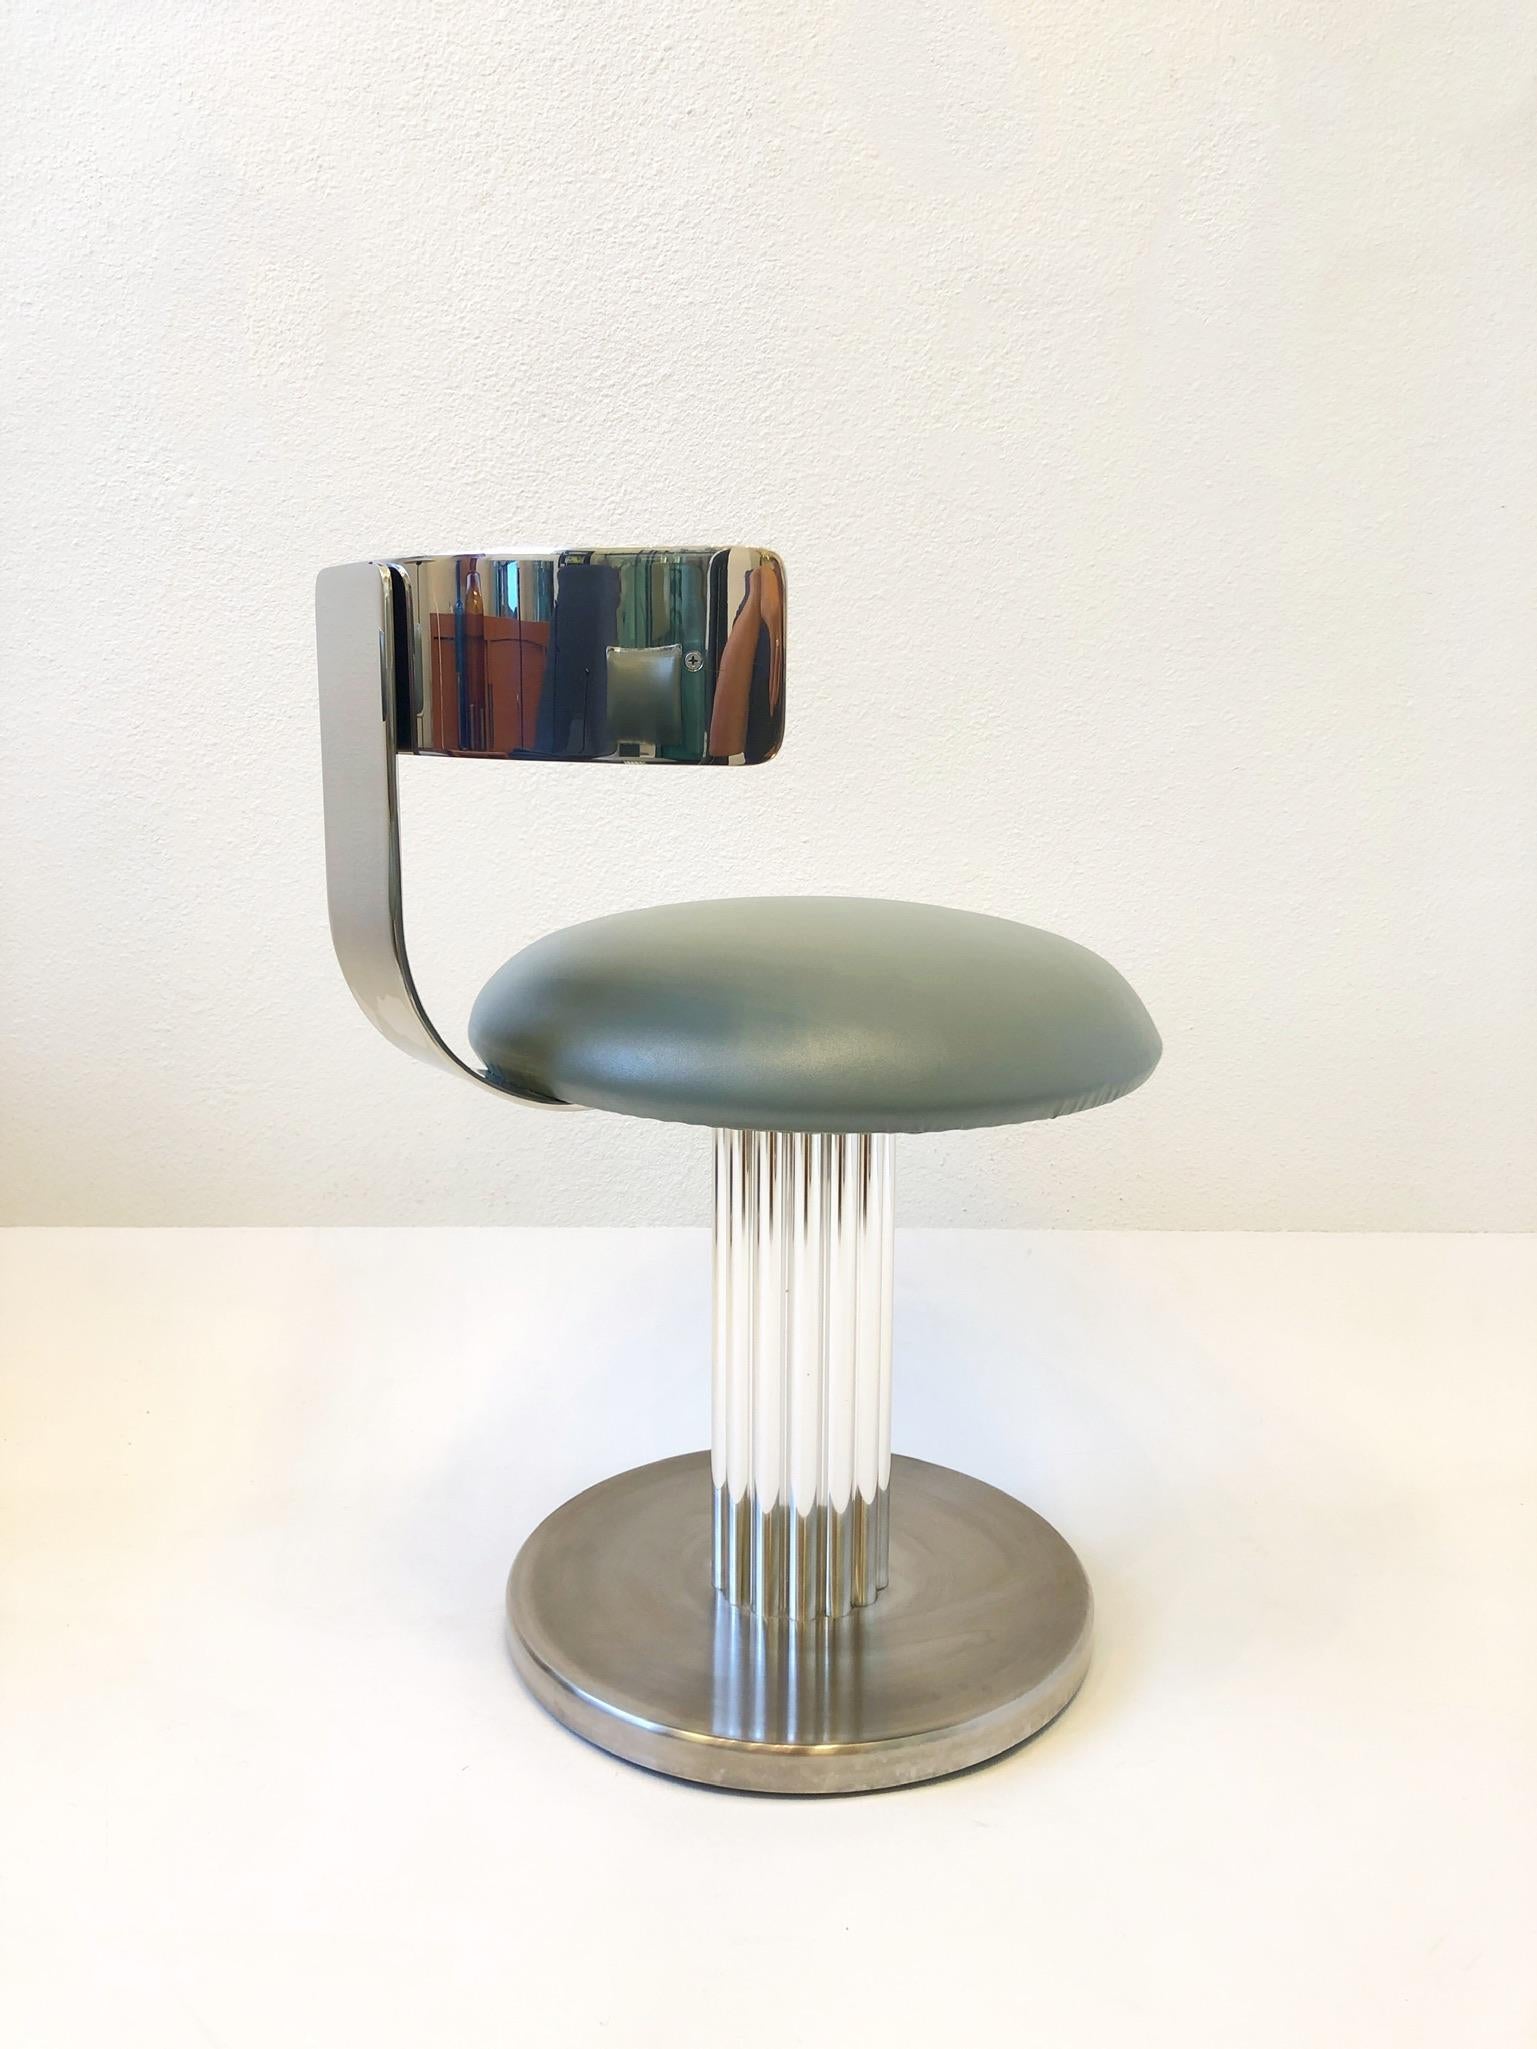 Late 20th Century Set of Four Stainless Steel Swivel Stools or Chairs by Design For Leisure